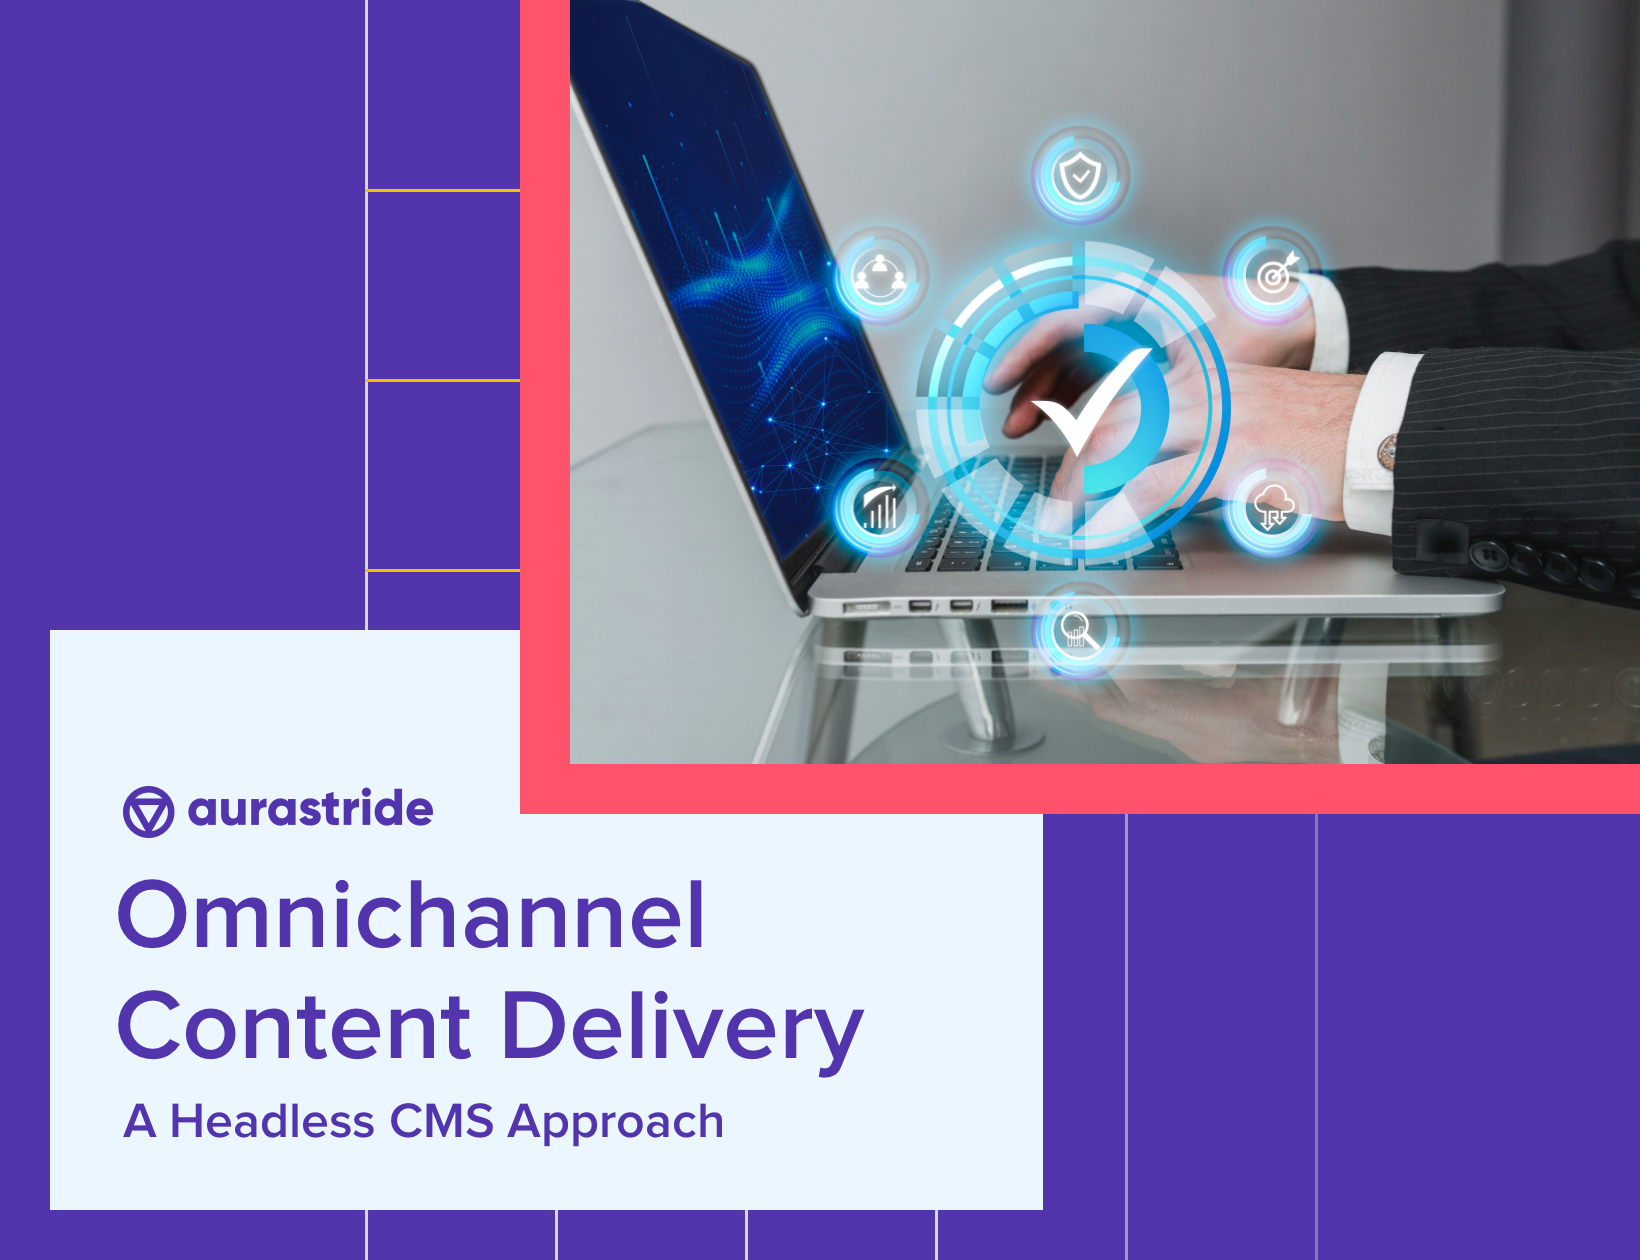 Omnichannel Content Delivery: A Headless CMS Approach